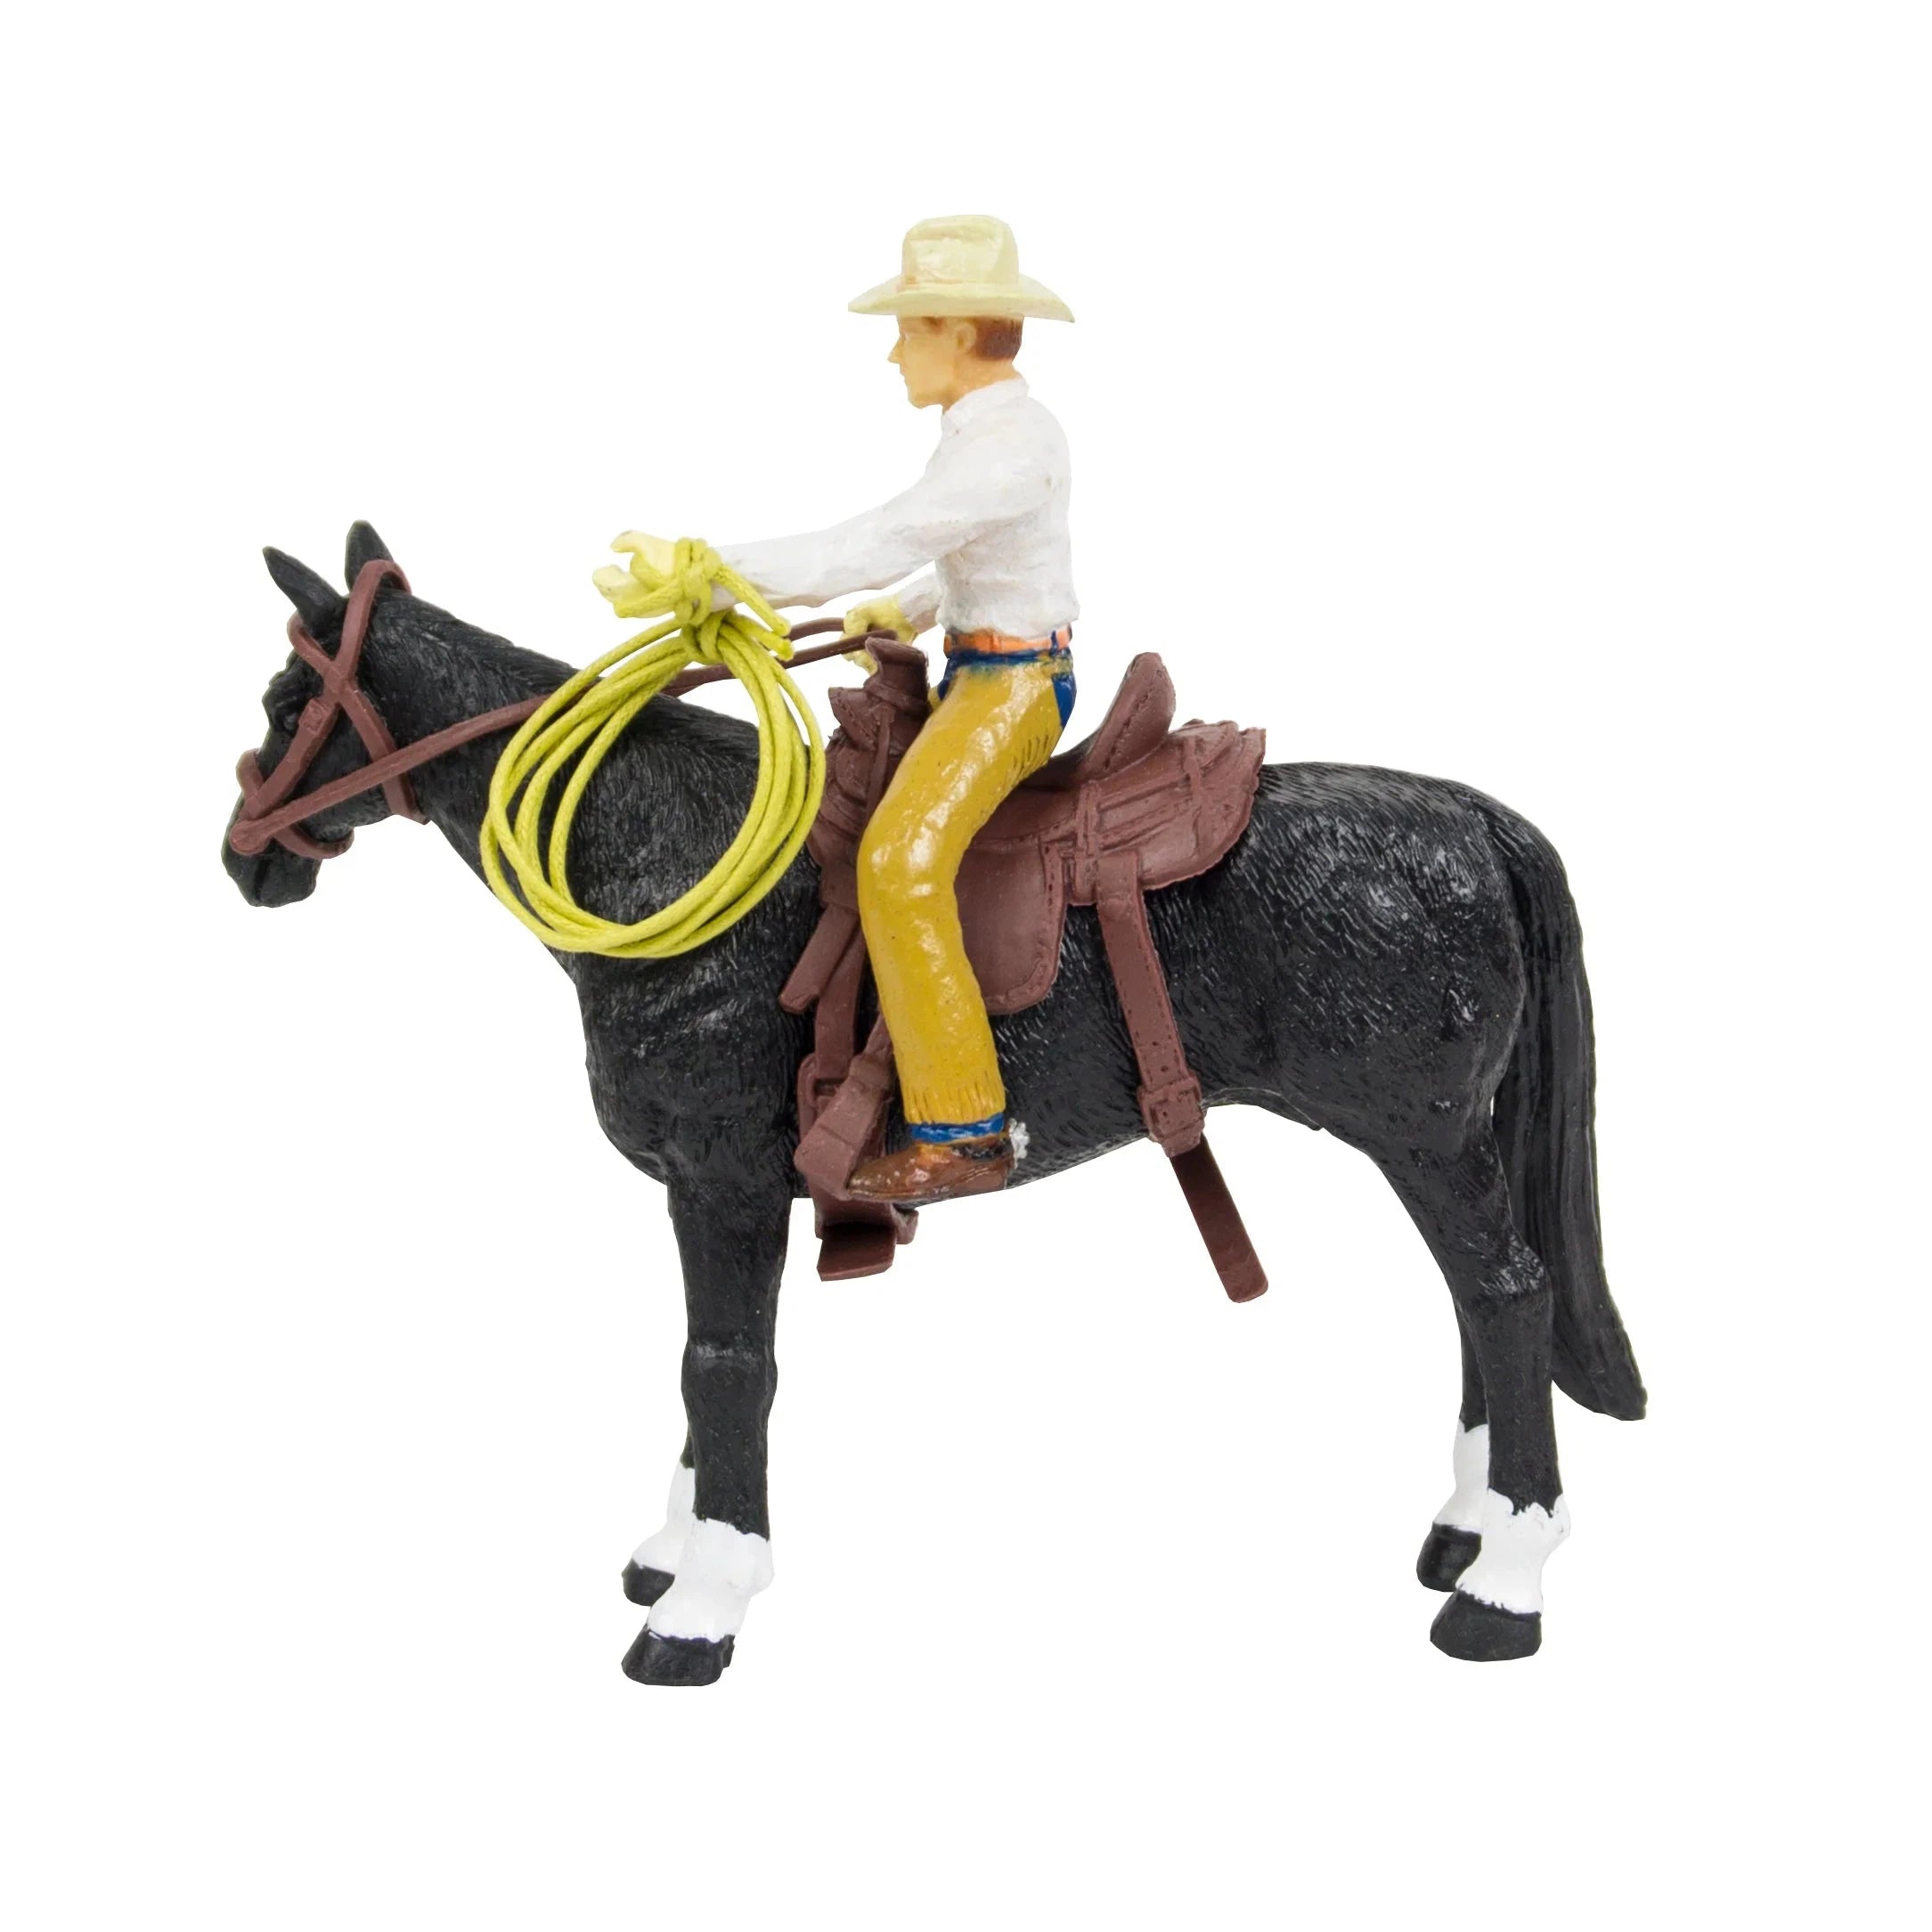 Big Country Toys Cowboy-BIG COUNTRY TOYS-Little Giant Kidz